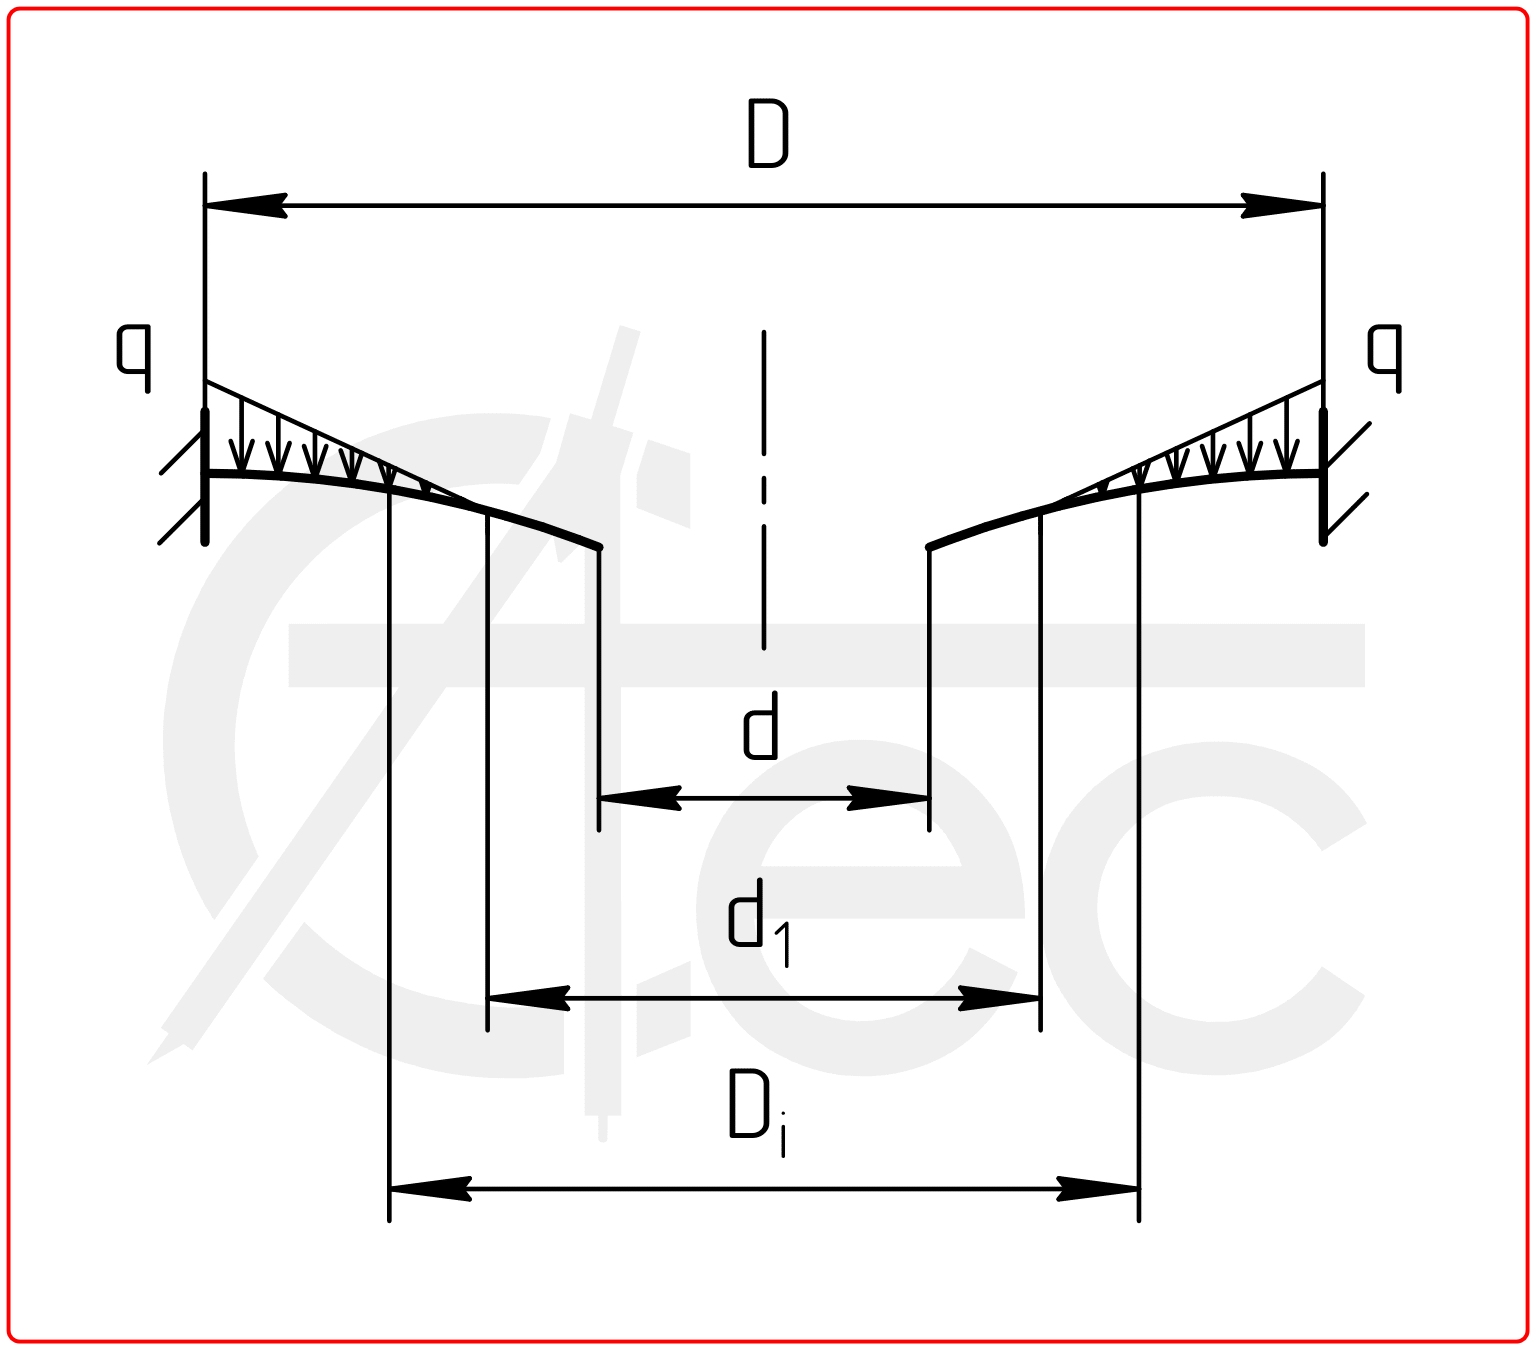 Circle plate with outer edge simply supported and inner edge fixed under distributed load